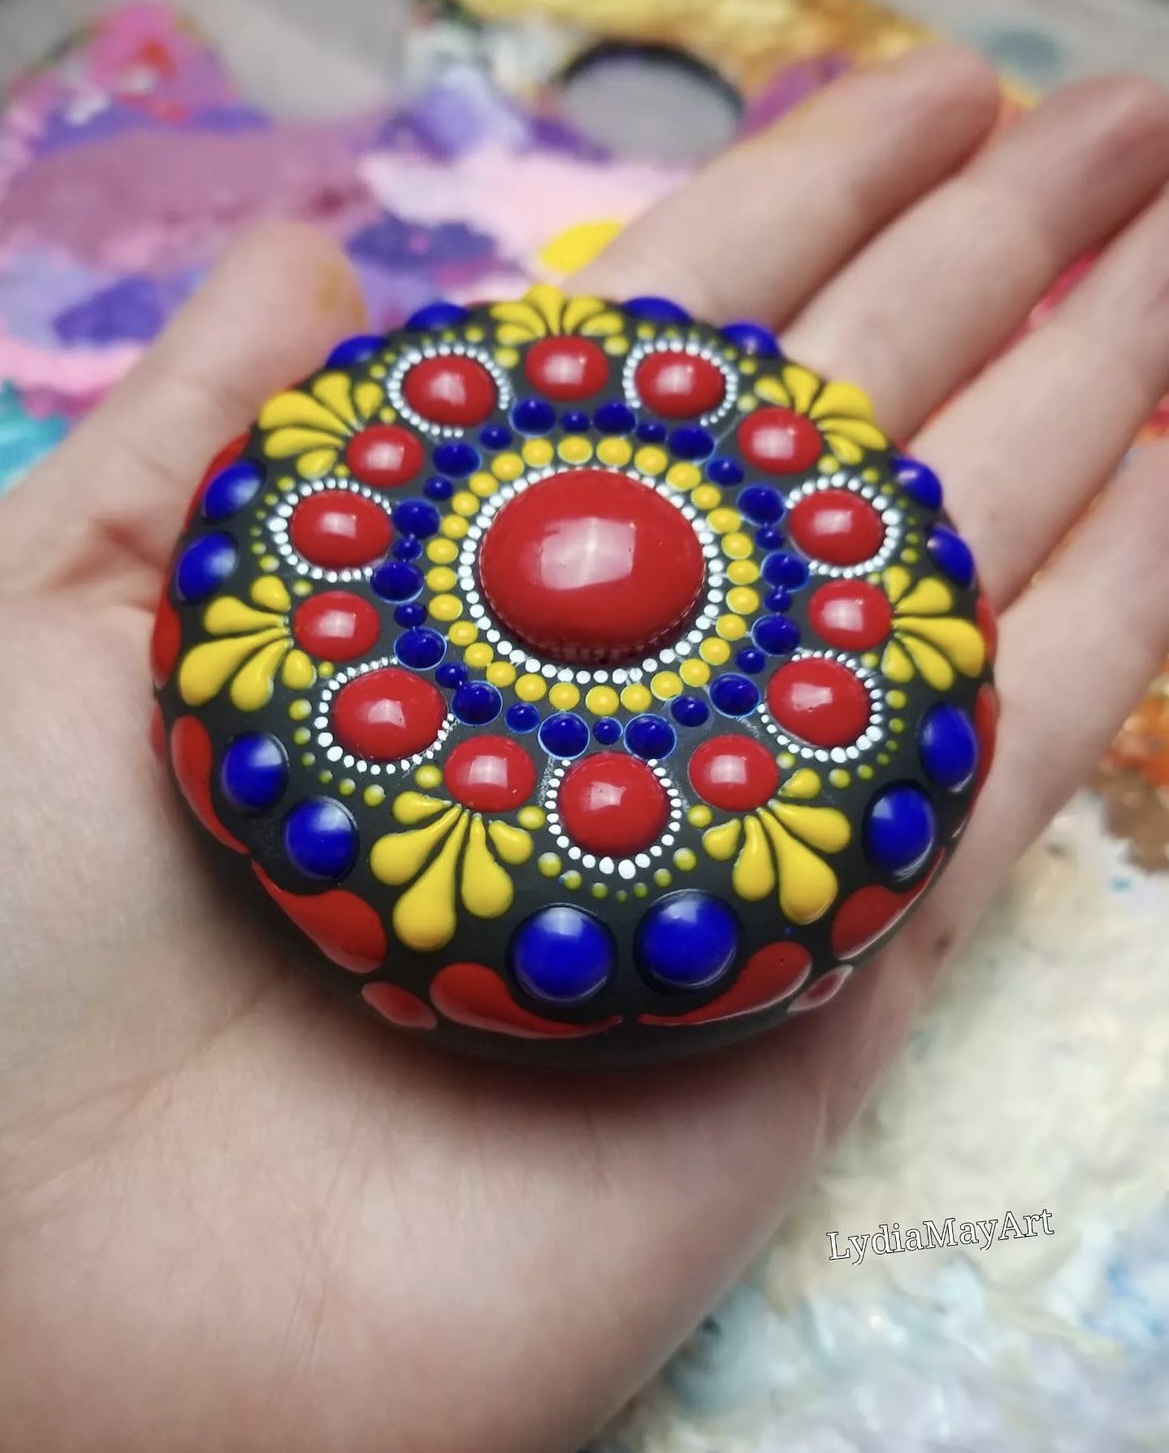 How to paint a mandala stone with puffy dots - Dot painting tutorial 